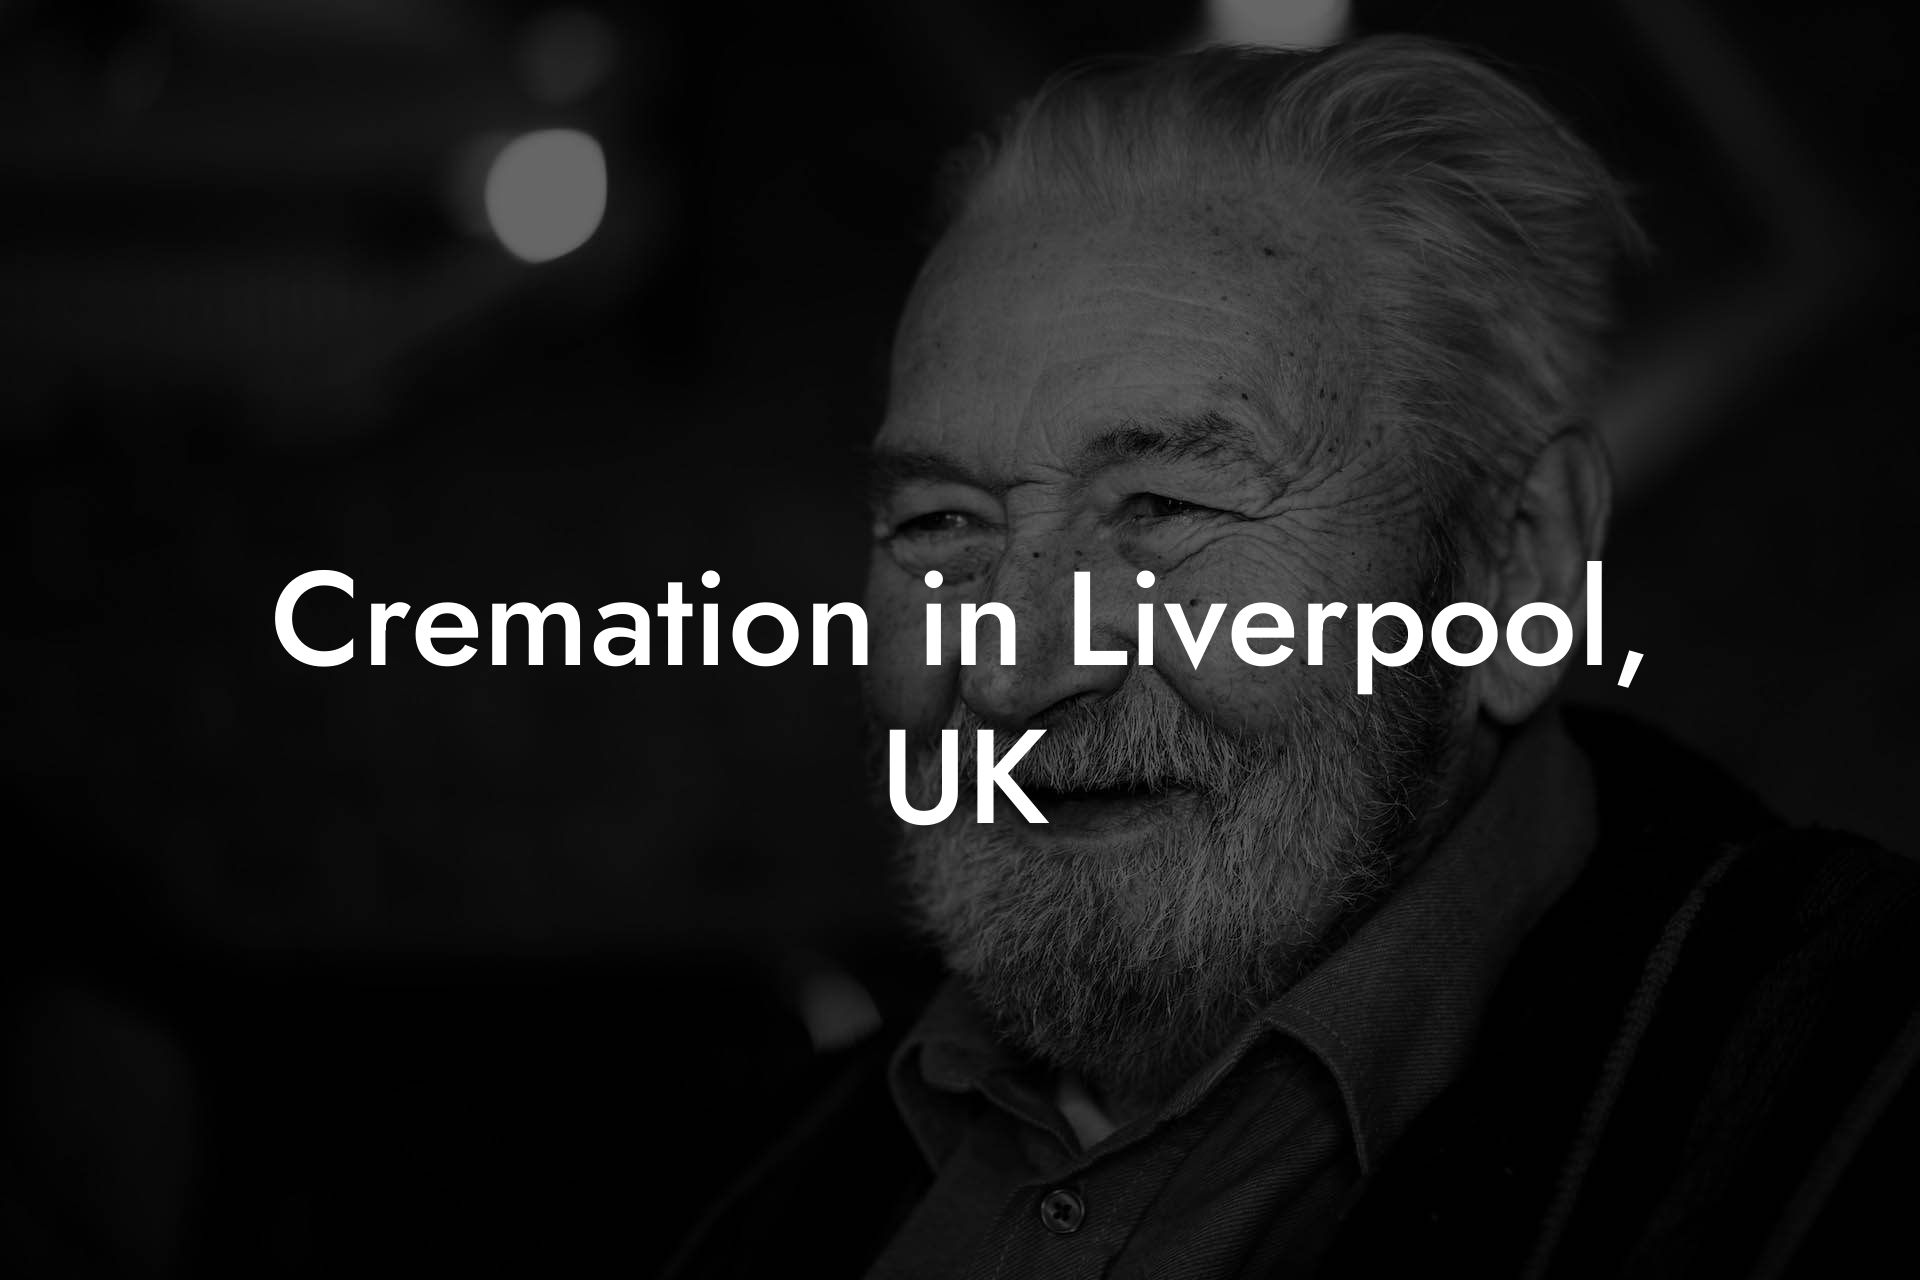 Cremation in Liverpool, UK